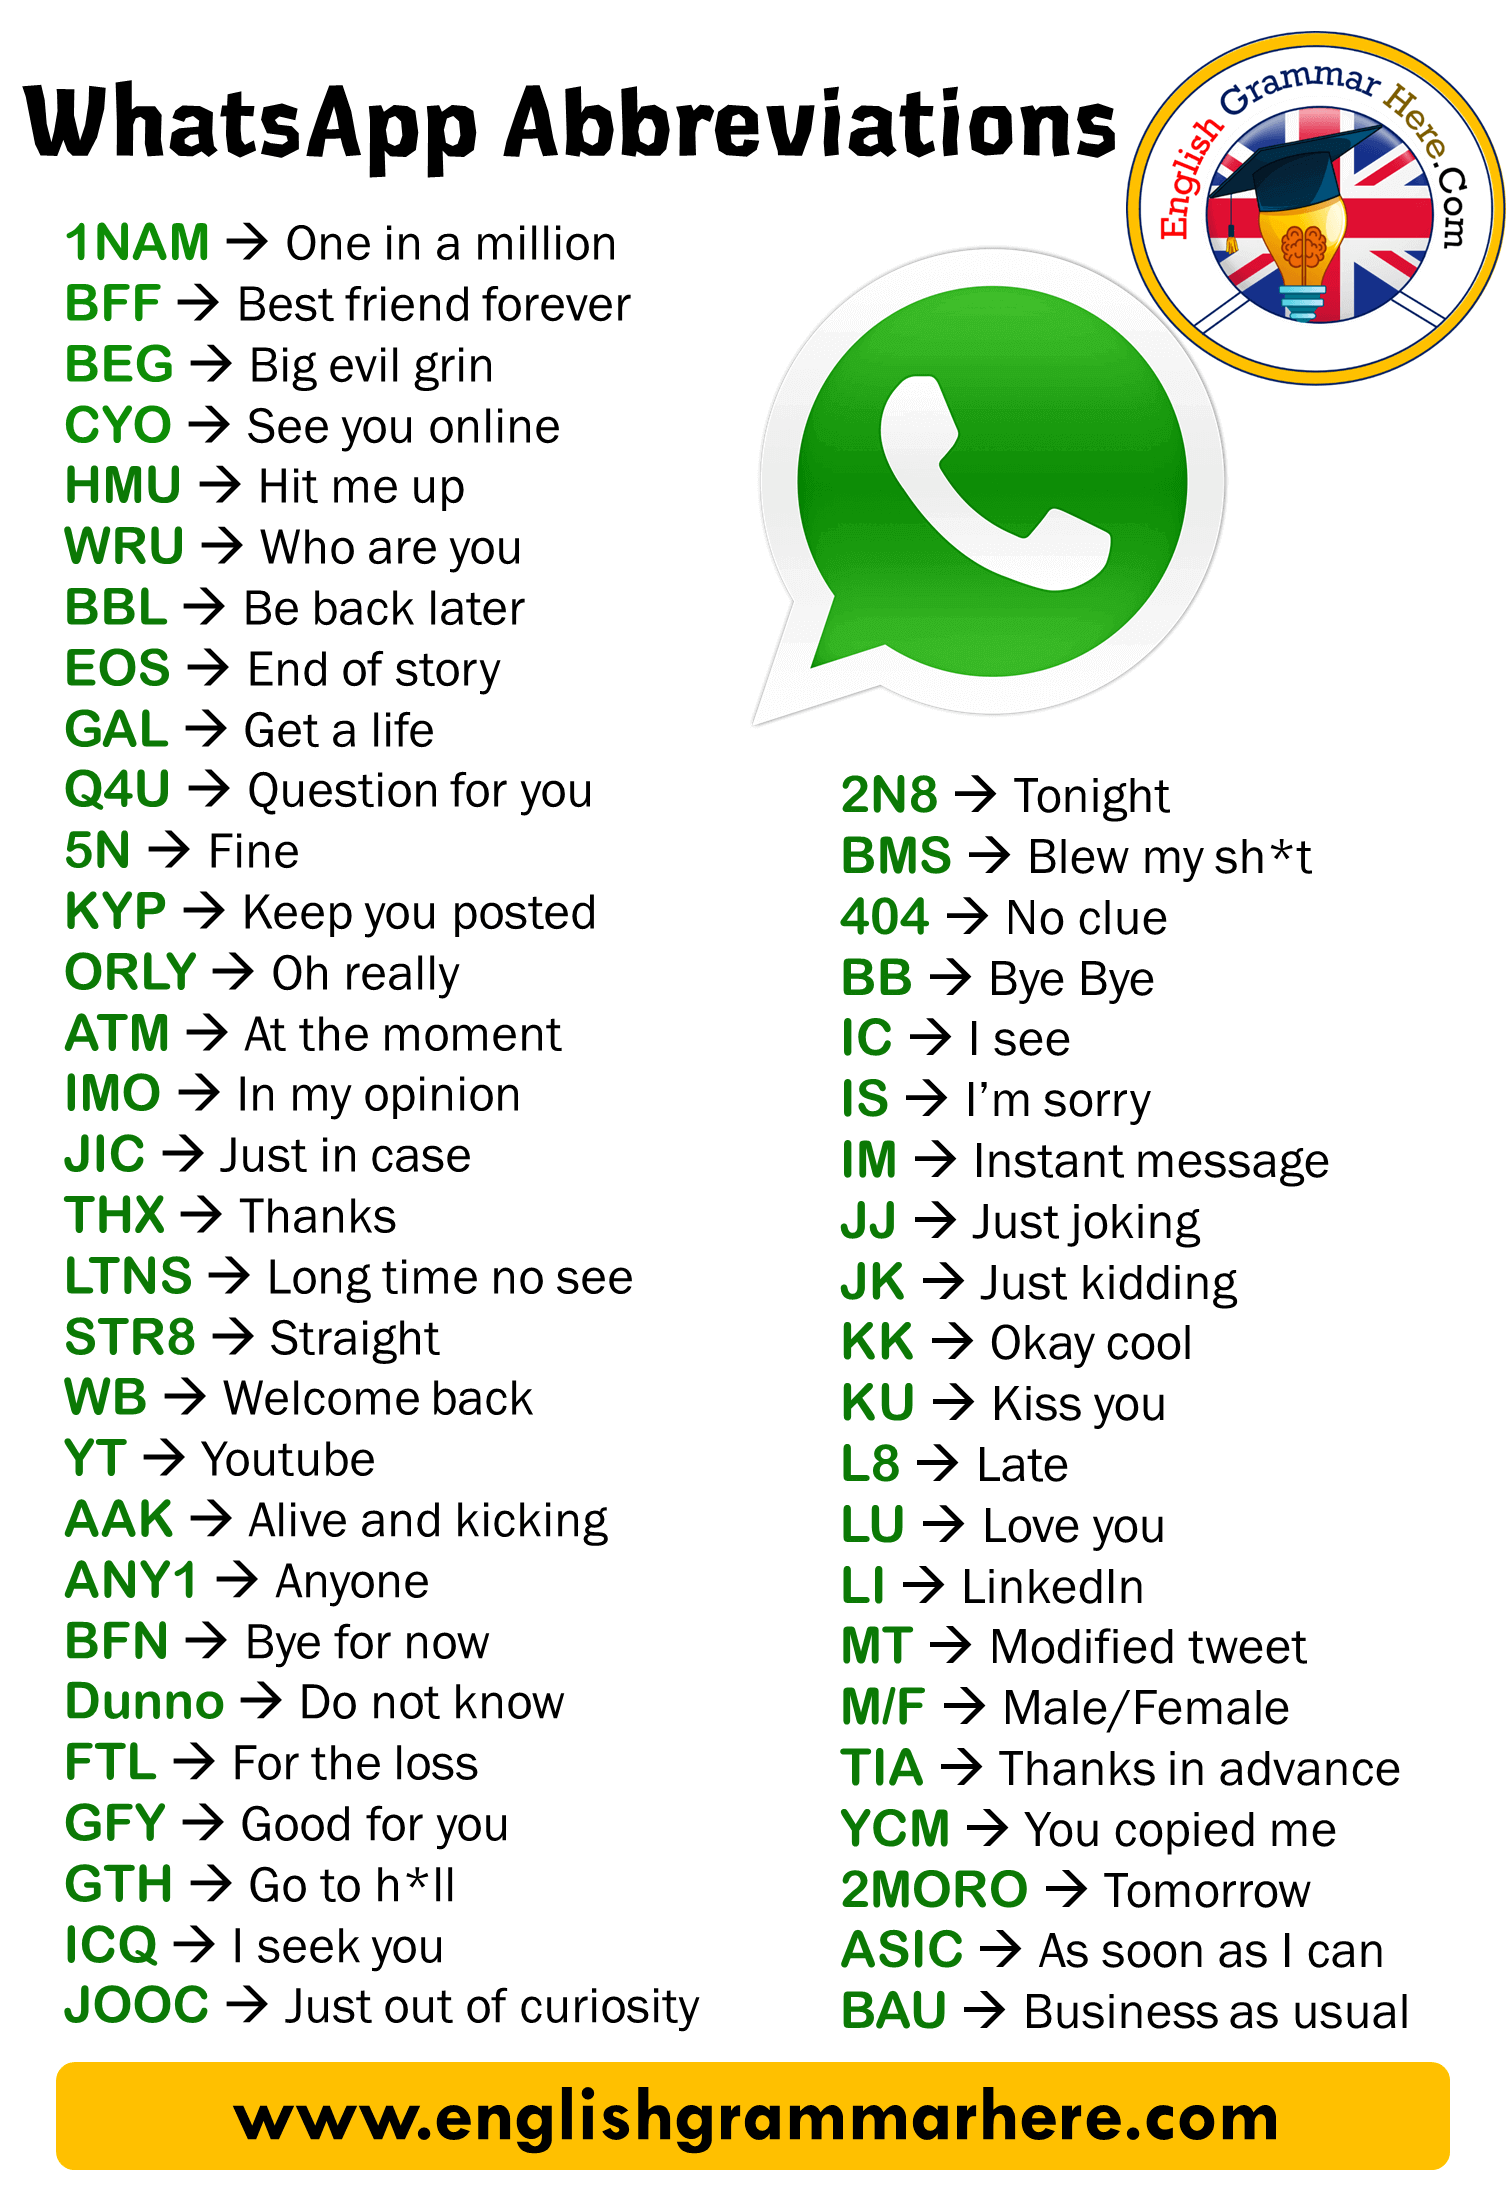 Topics to talk about with a guy on whatsapp